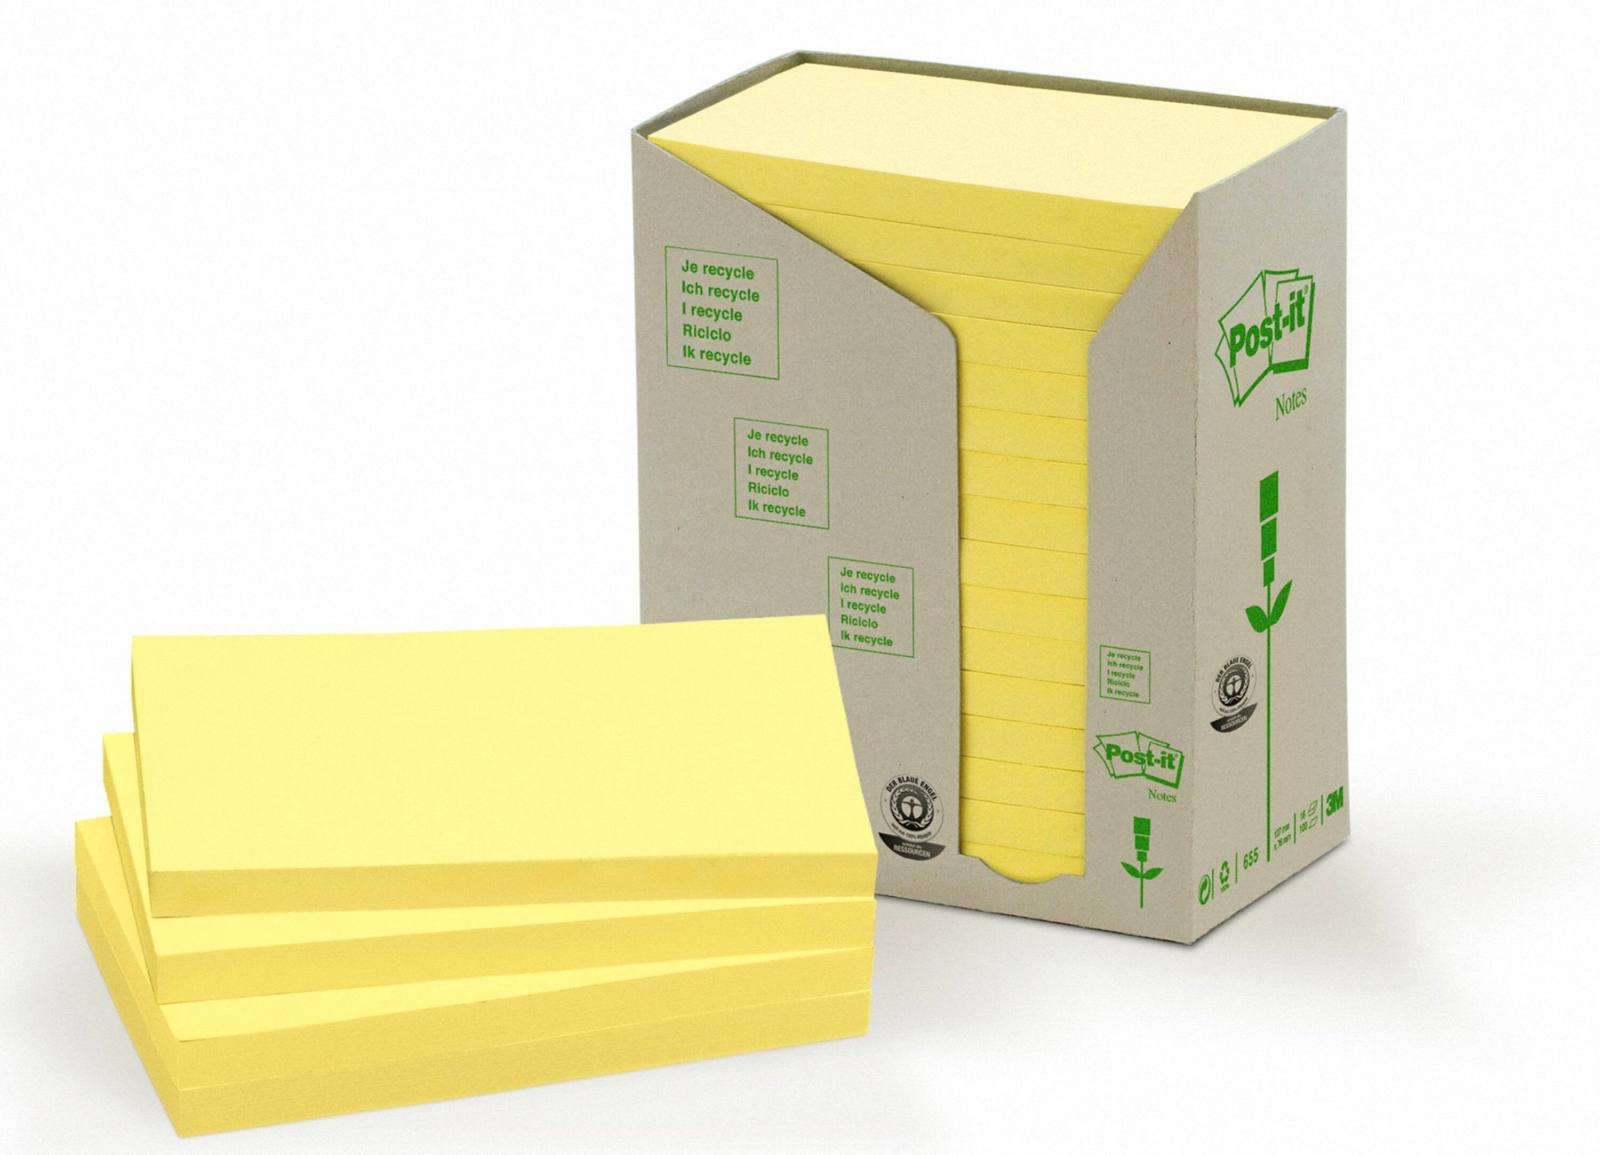 3M Post-it Recycling Notes 655-1T, 127 mm x 76 mm, yellow, 16 pads of 100 sheets each